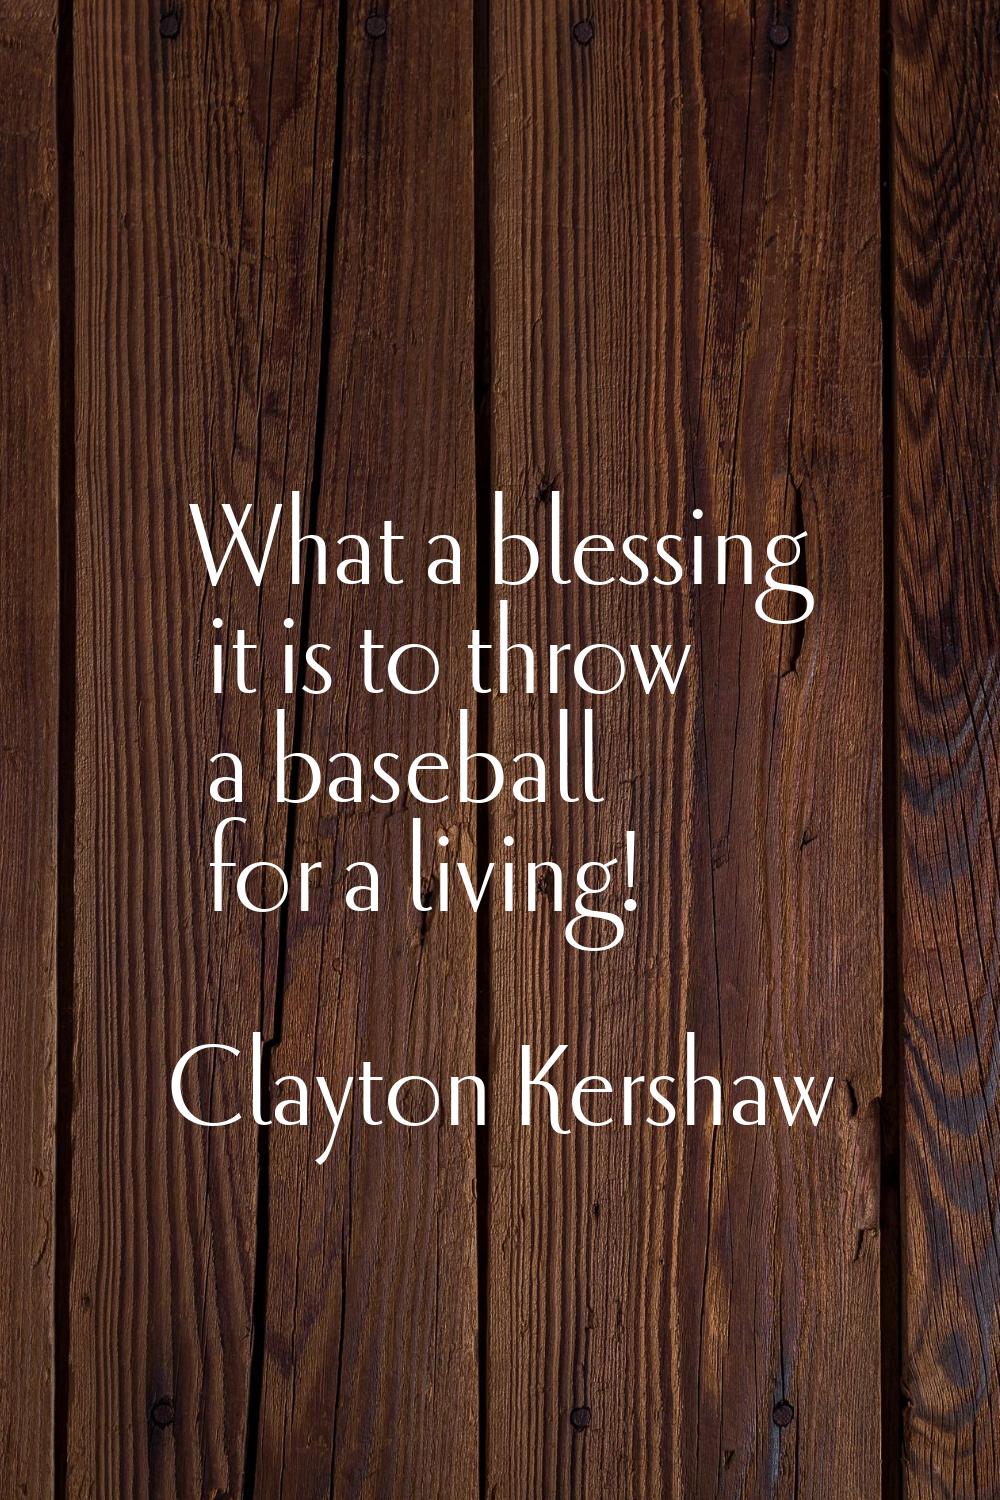 What a blessing it is to throw a baseball for a living!